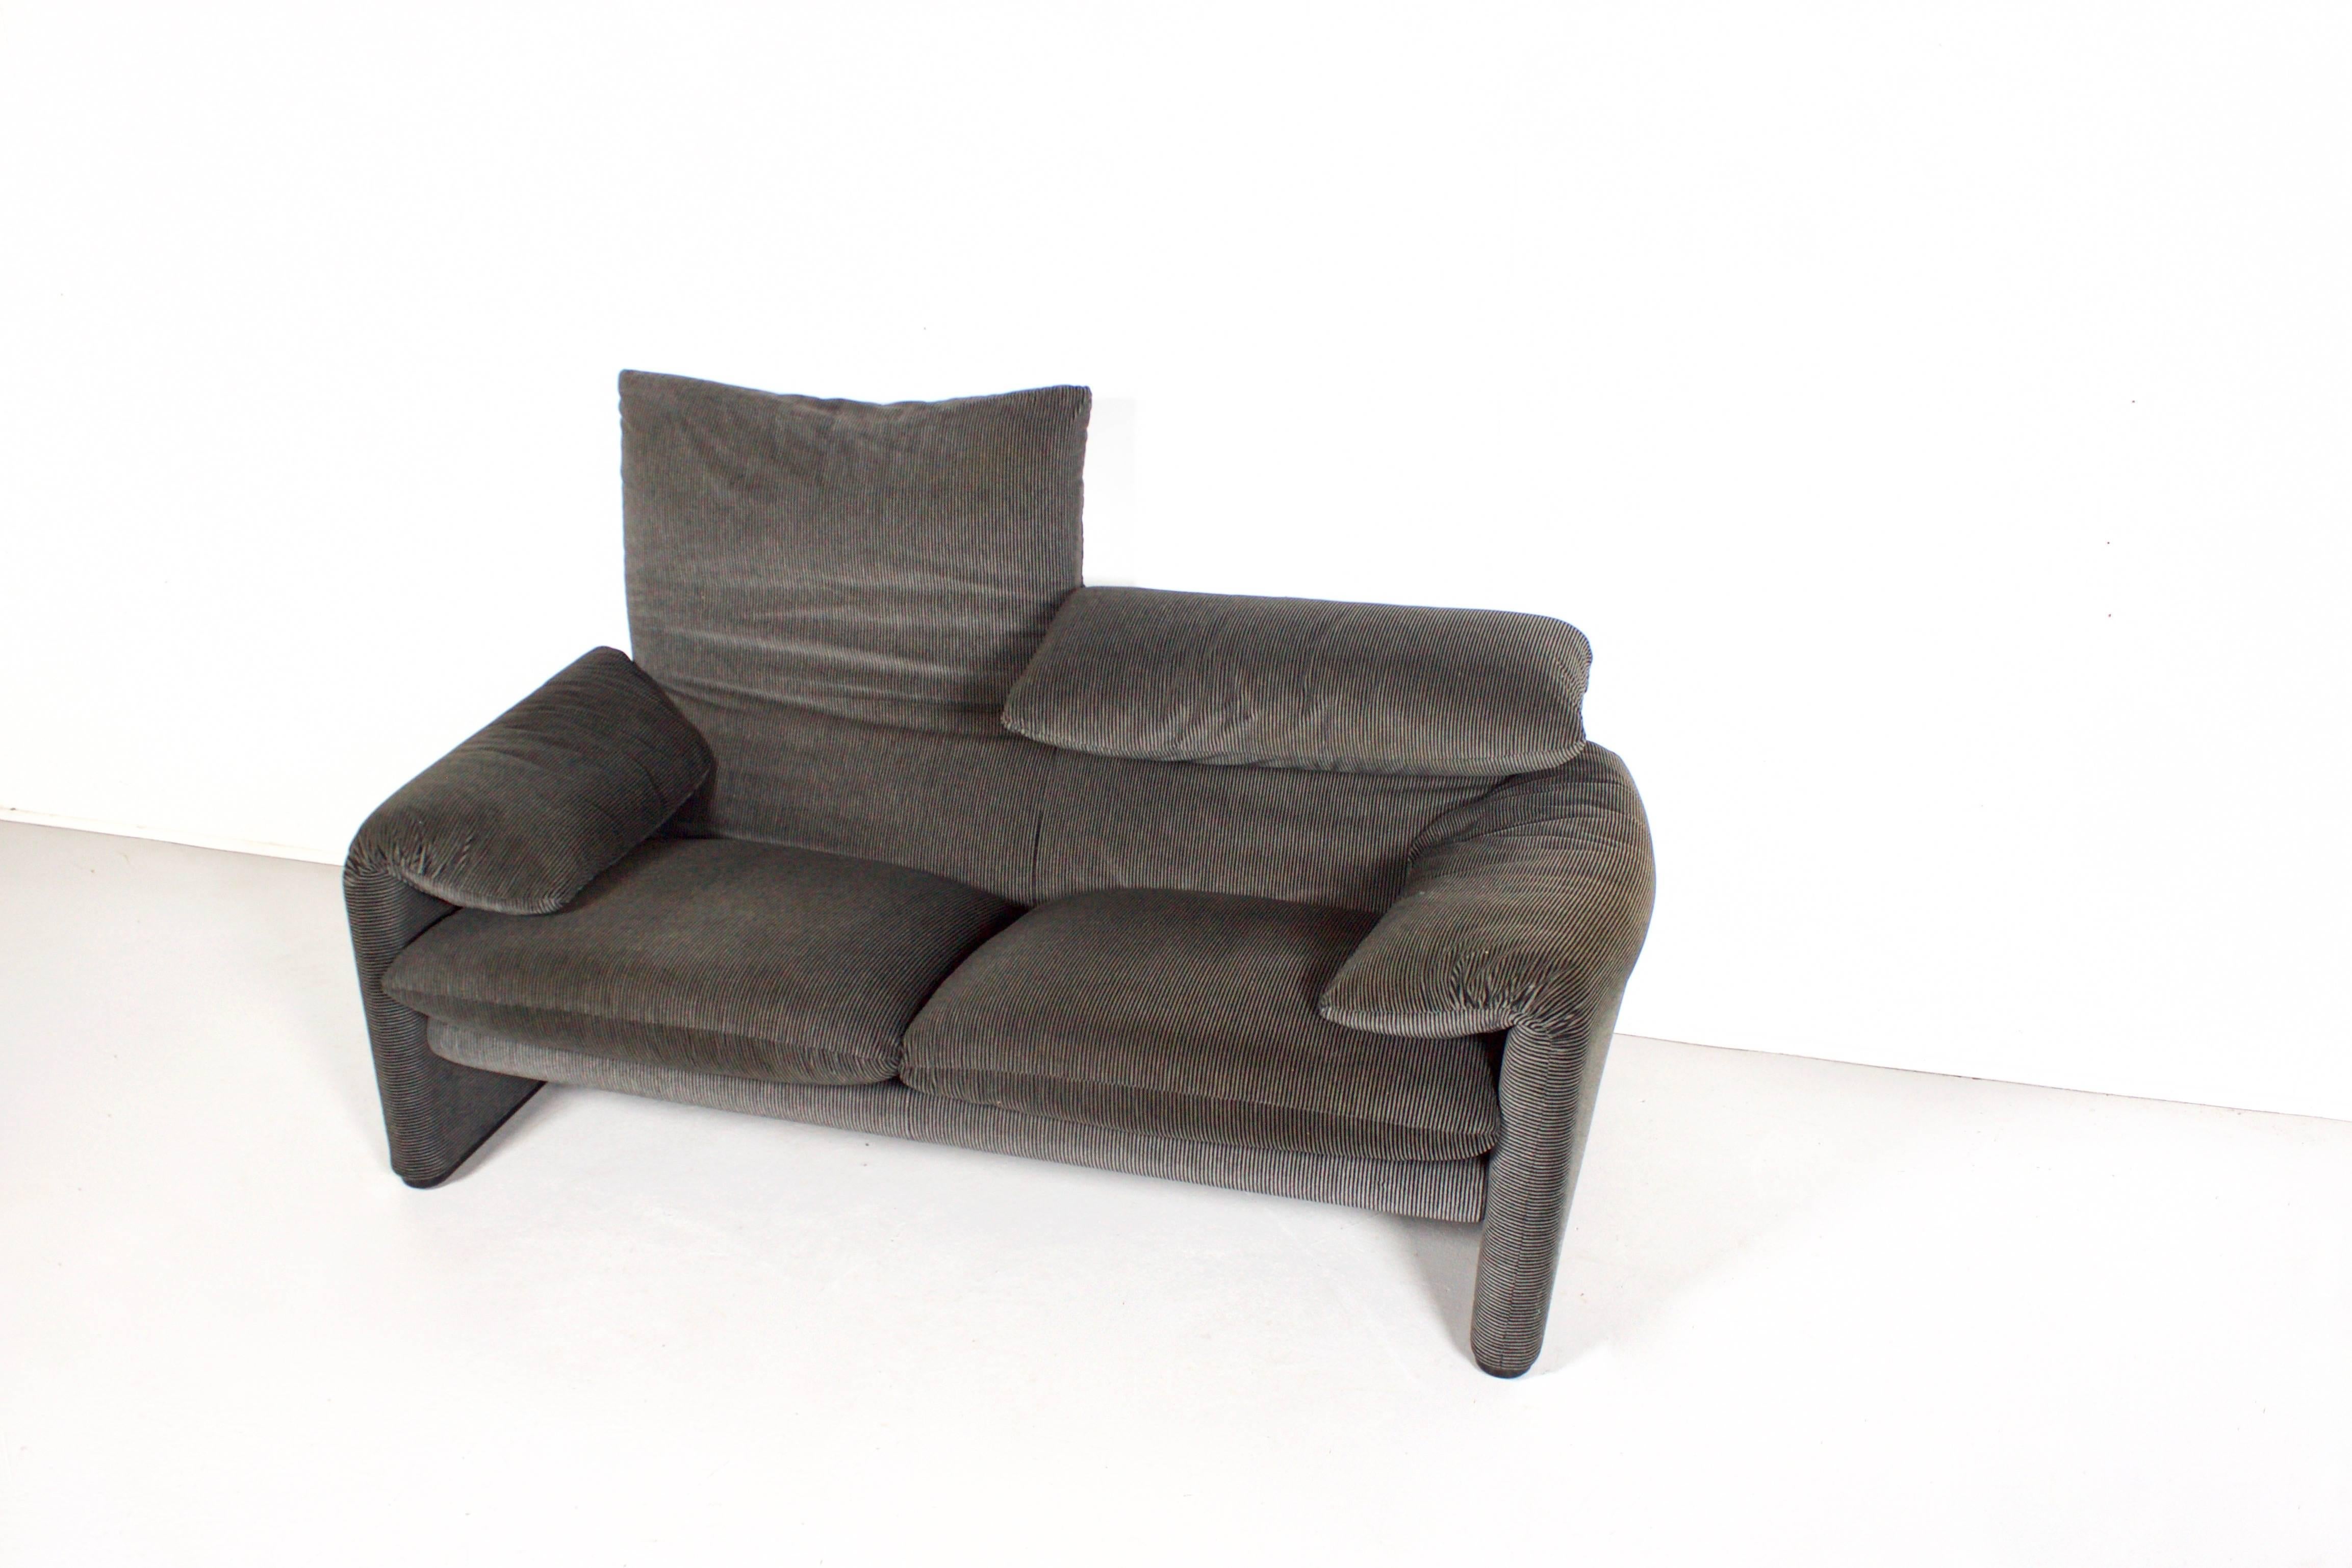 Two-seat Cassina Maralunga sofa in very good condition.

Designed by Vico Magistretti in 1973

Velvet fabric: Velluto Bicolore, striped grey and black 

The sofa has an adjustable headrest for a high or low backrest version

The Maralunga